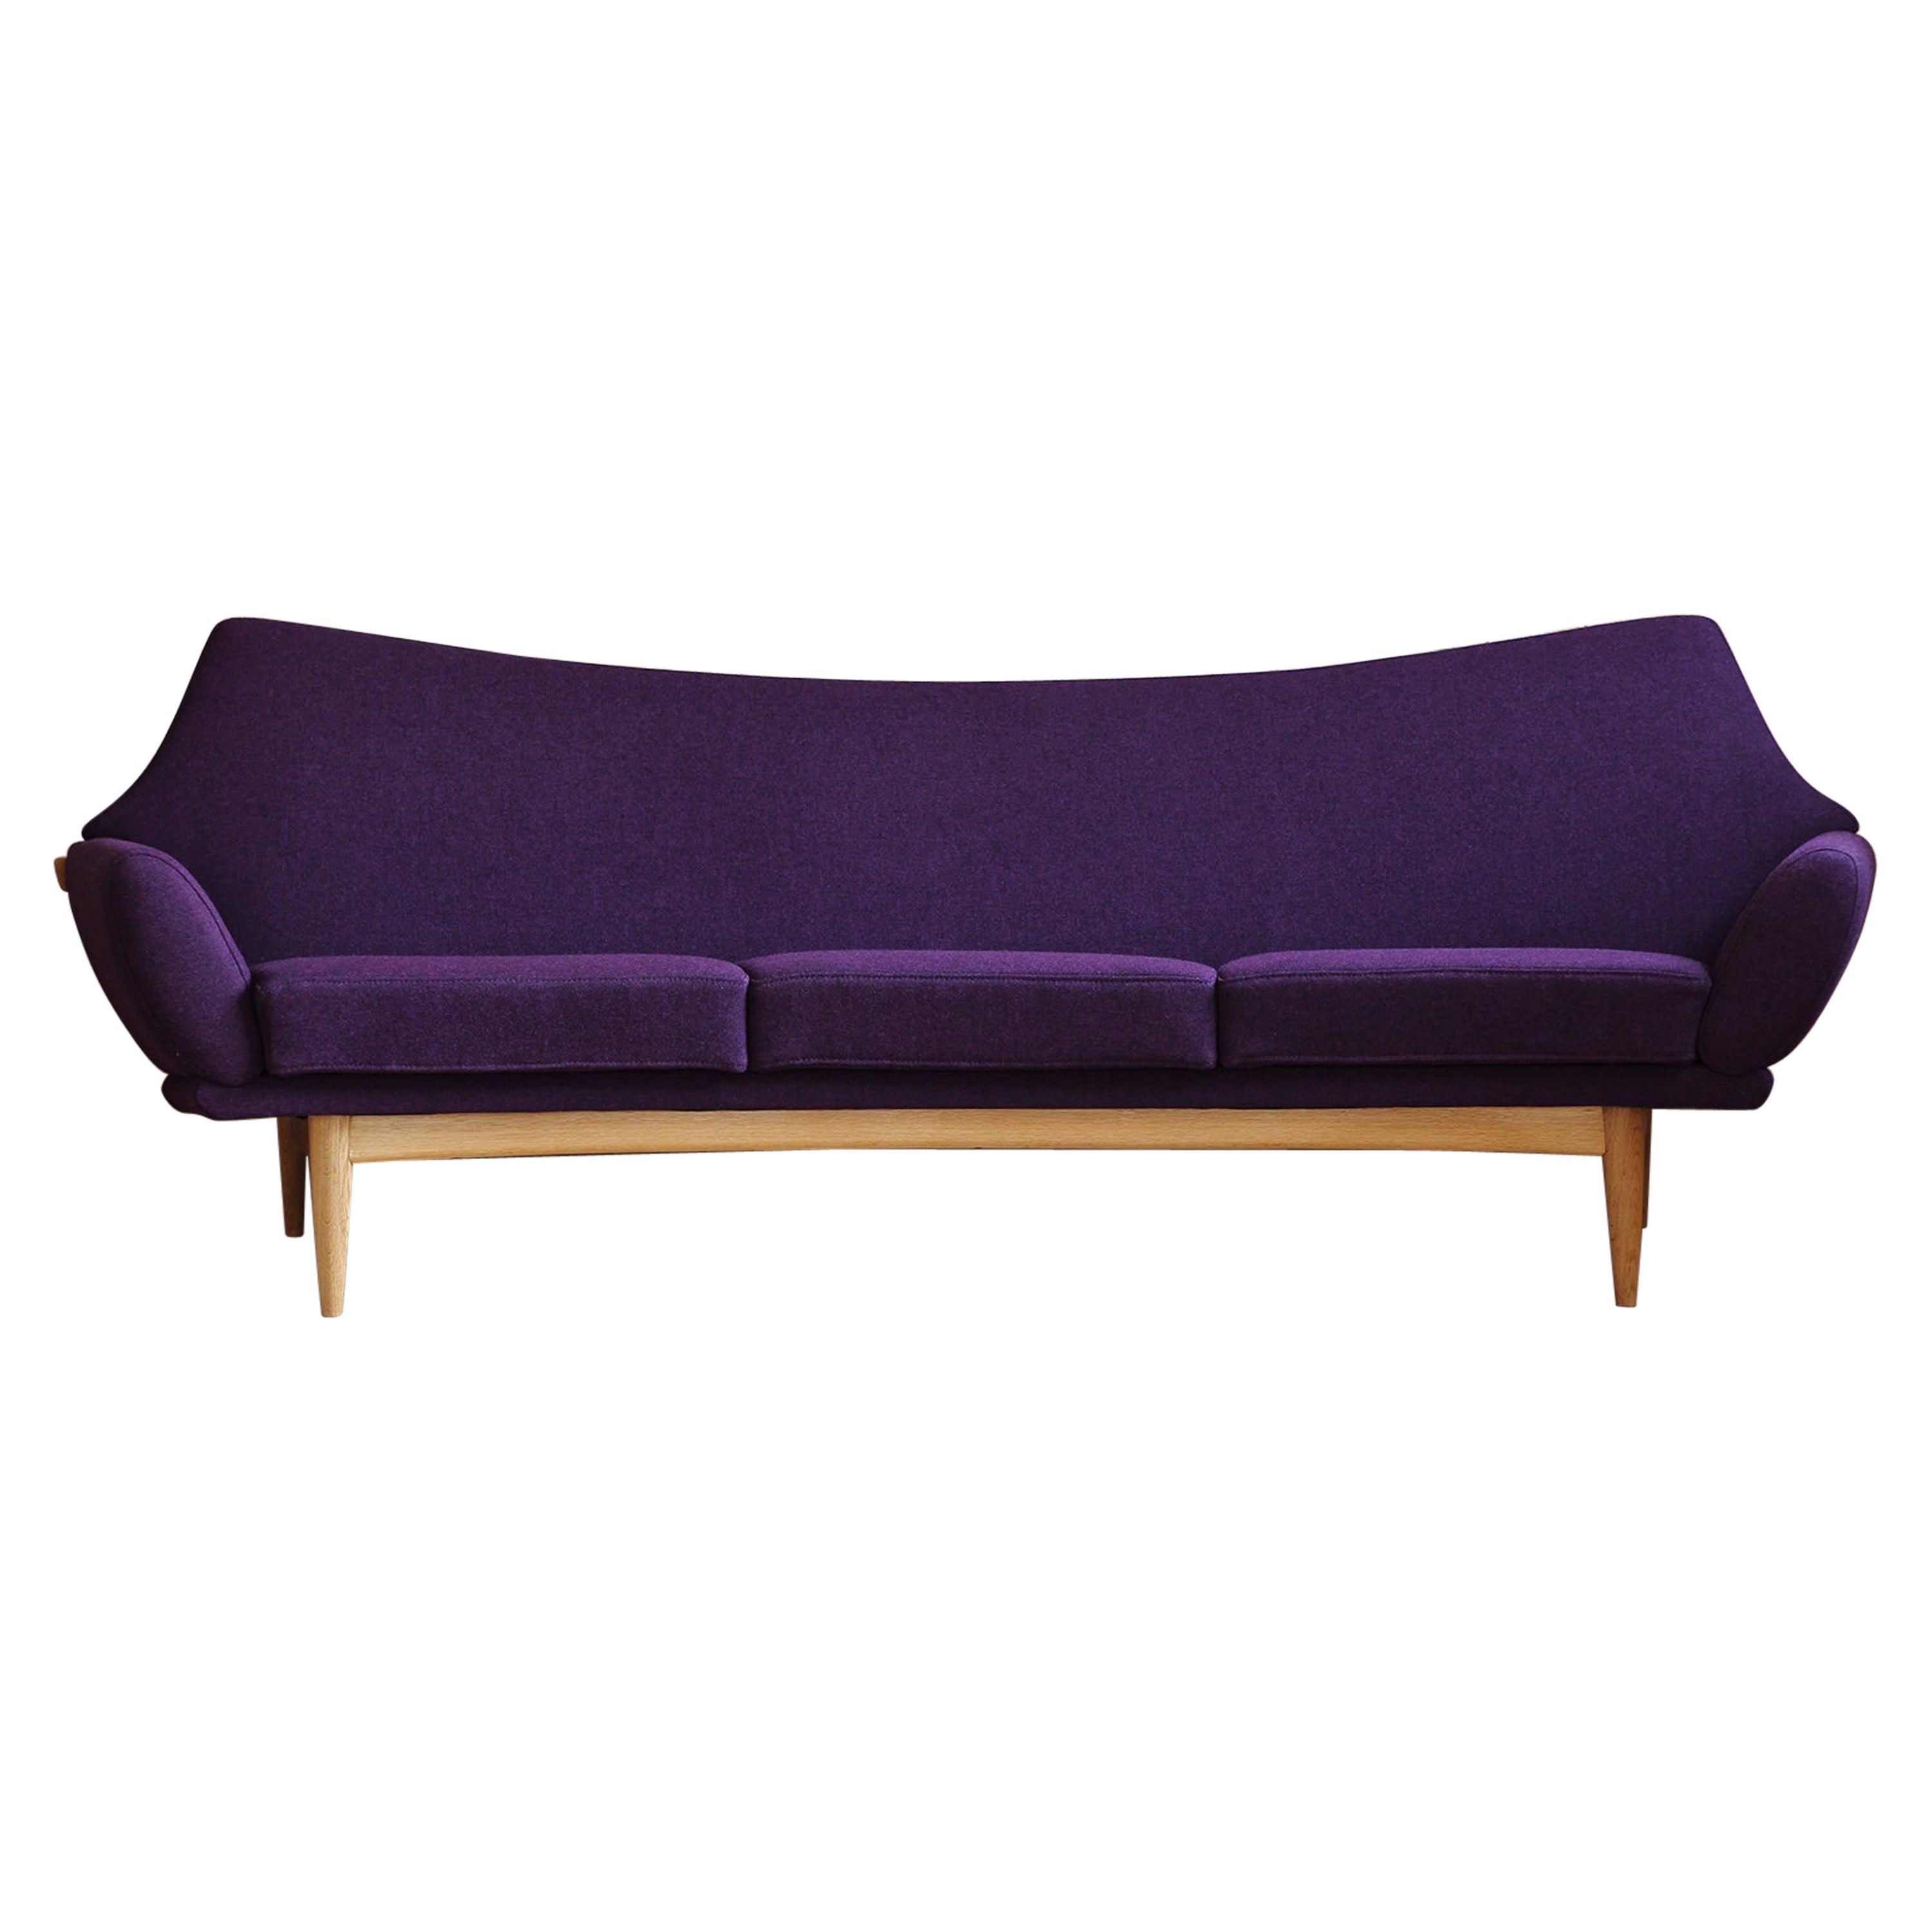 Johannes Andersen Sofa for AB Trensums Reupholstered in Kvadrat Fabric, 1950s